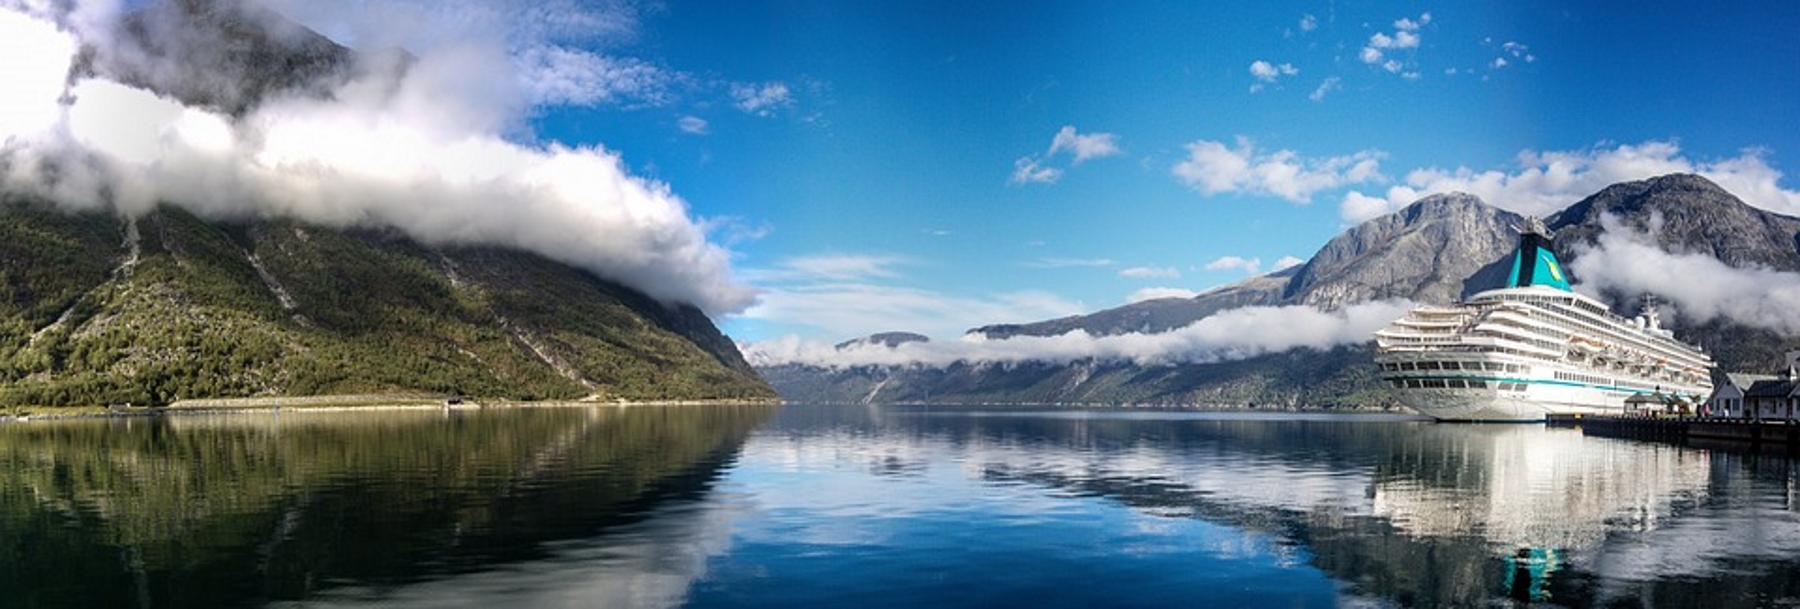 Norway-fjord-panorama-boat-mountain-water-landscape